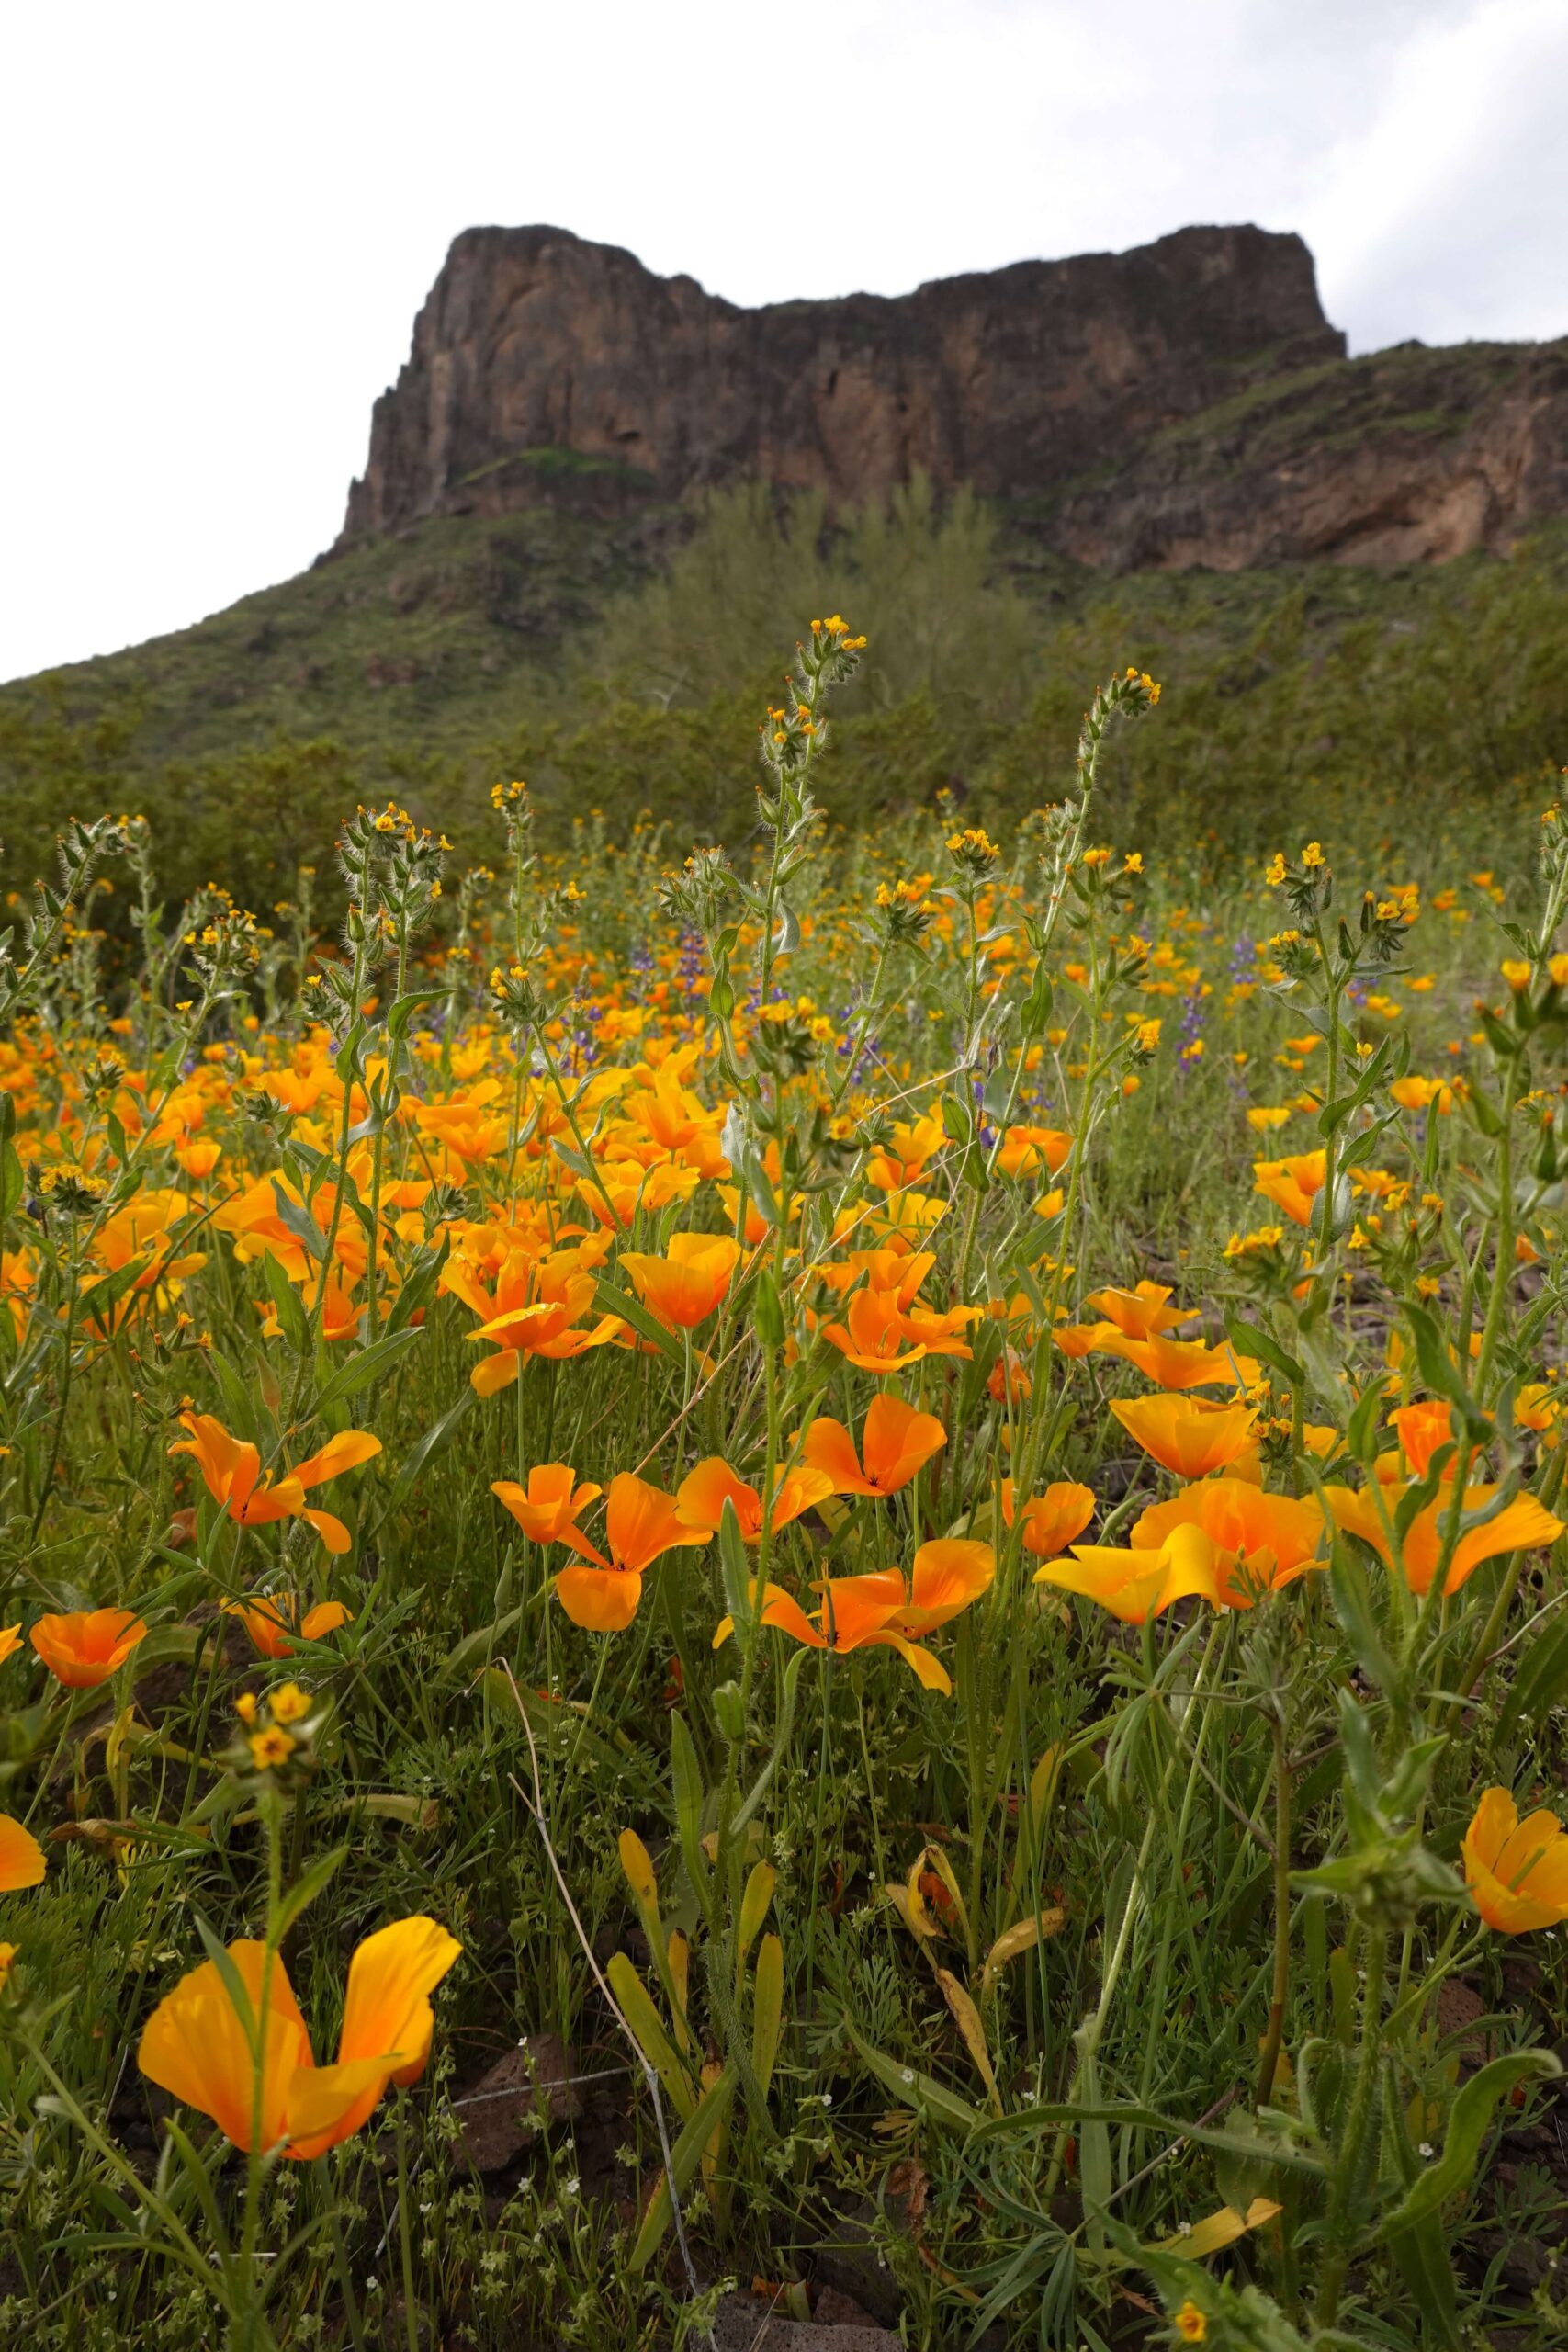 California Poppy Super Bloom at the Base of a Mountain in Arizona